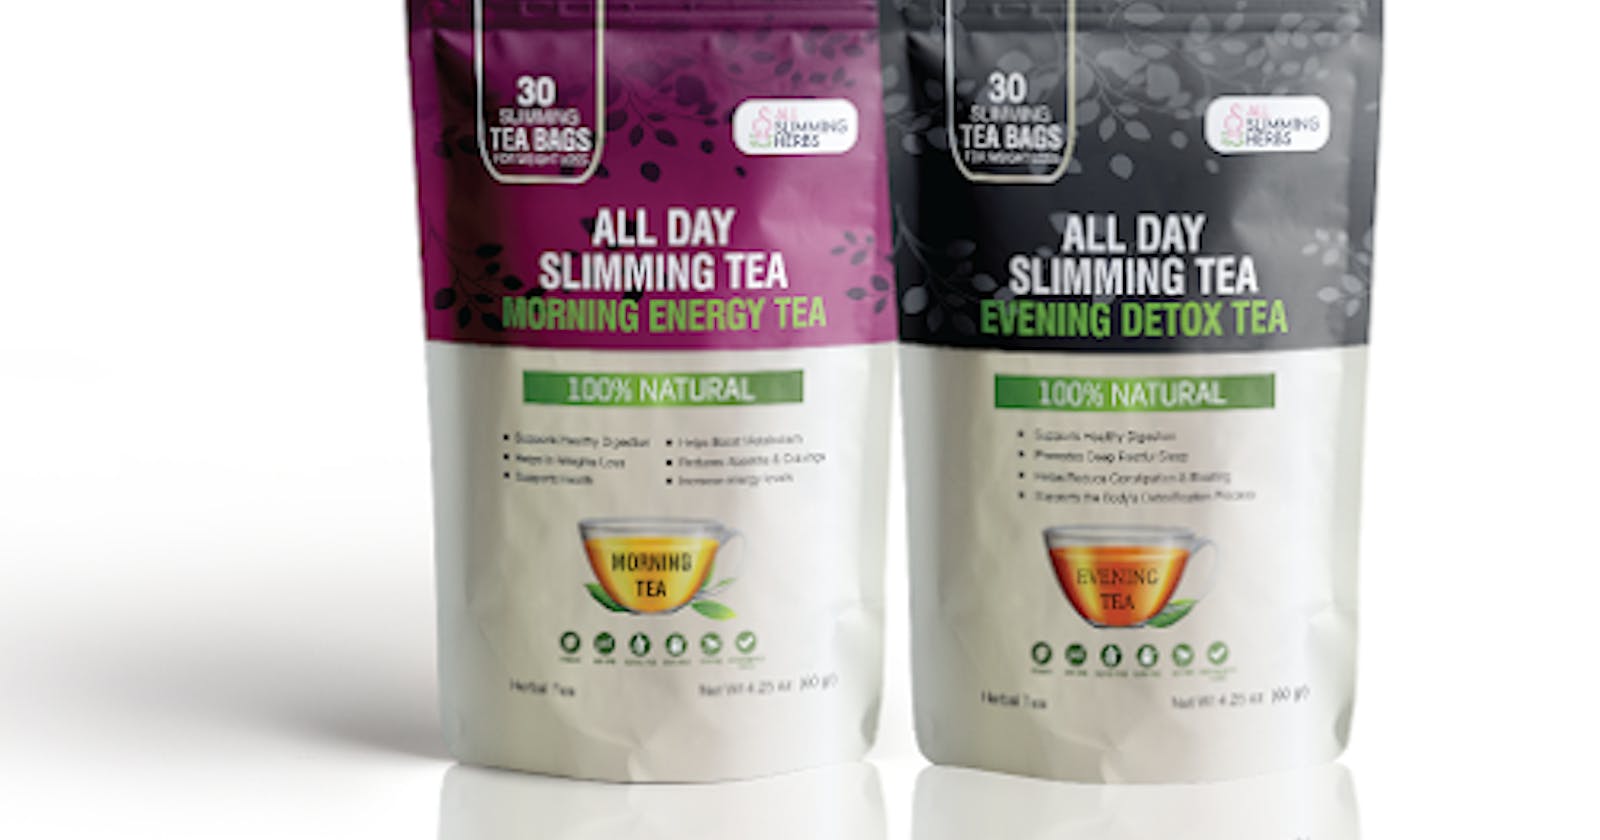 All Day Slimming Tea [Weight Loss] Does It Work Or Is It Waste Of Money?